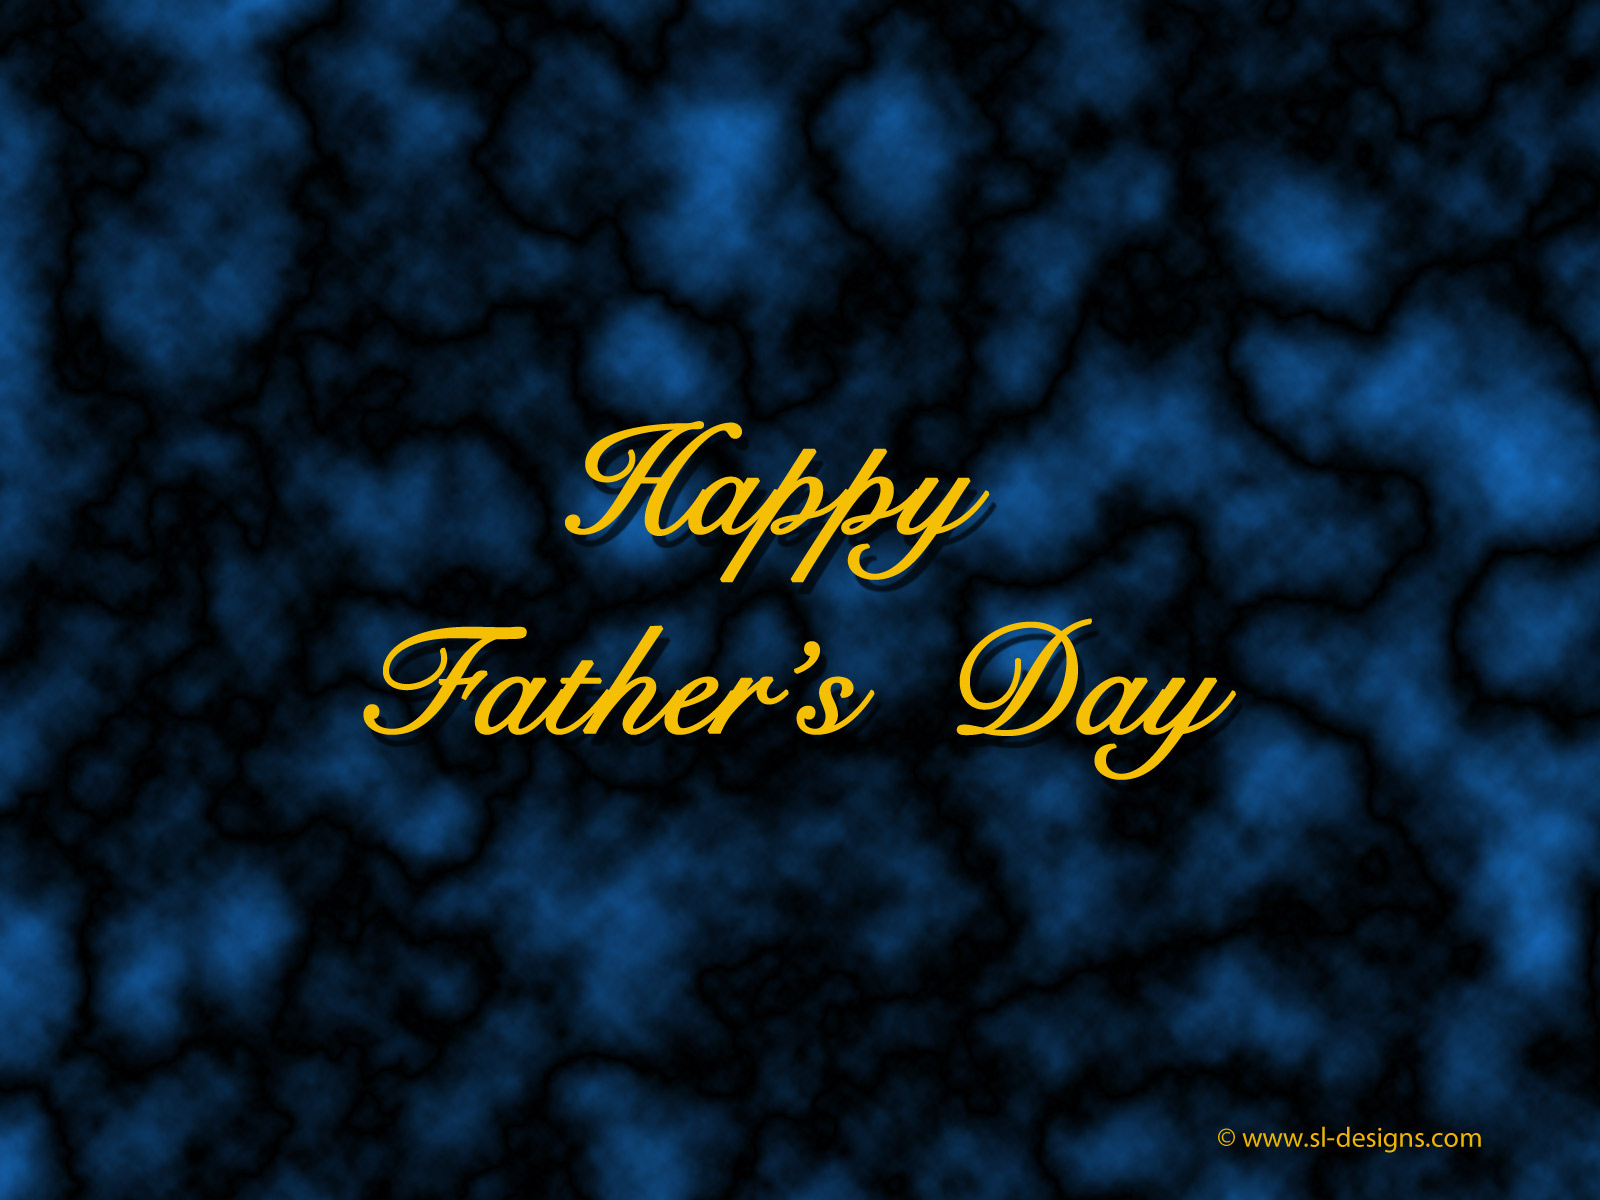 Free Fathers day wallpapers for your desktop, web site or blog